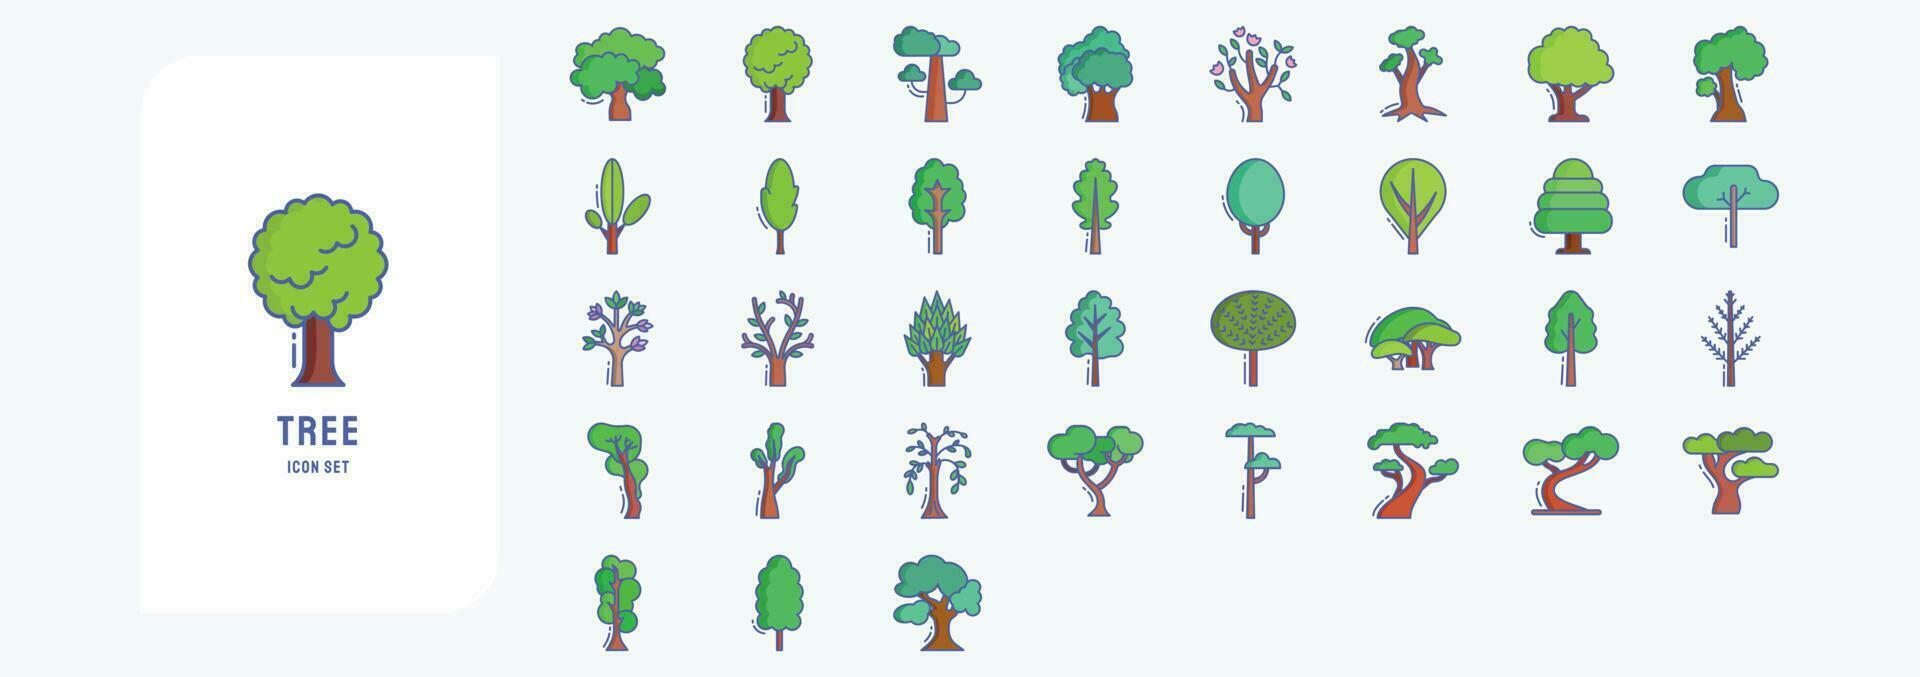 Collection of icons related to Tree, including icons like Apple, Locust, Magnolia, Maple and more vector